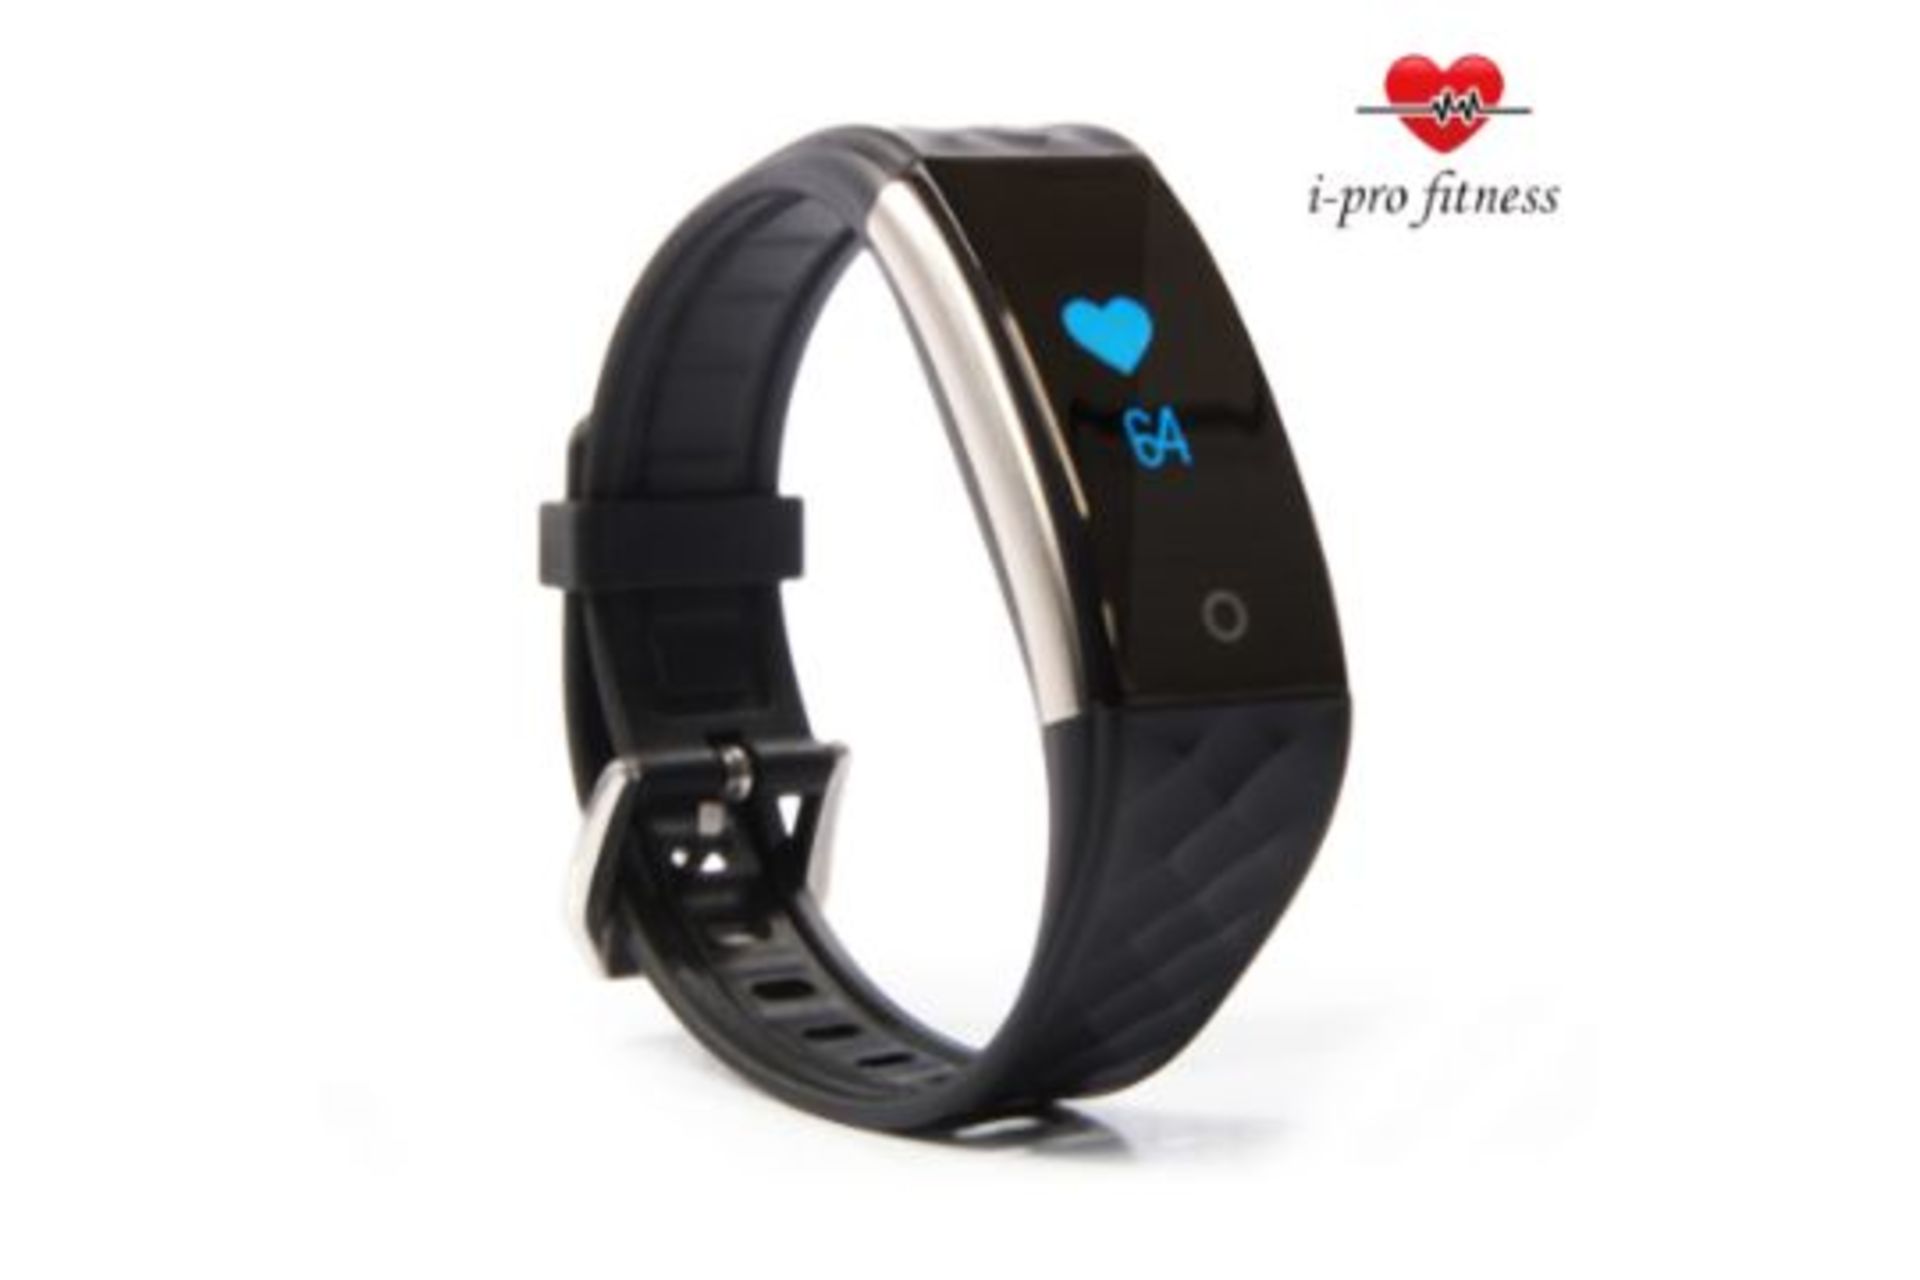 I-Pro S2 Waterproof Fitness Tracker With Heart Rate Monitor - Image 6 of 7